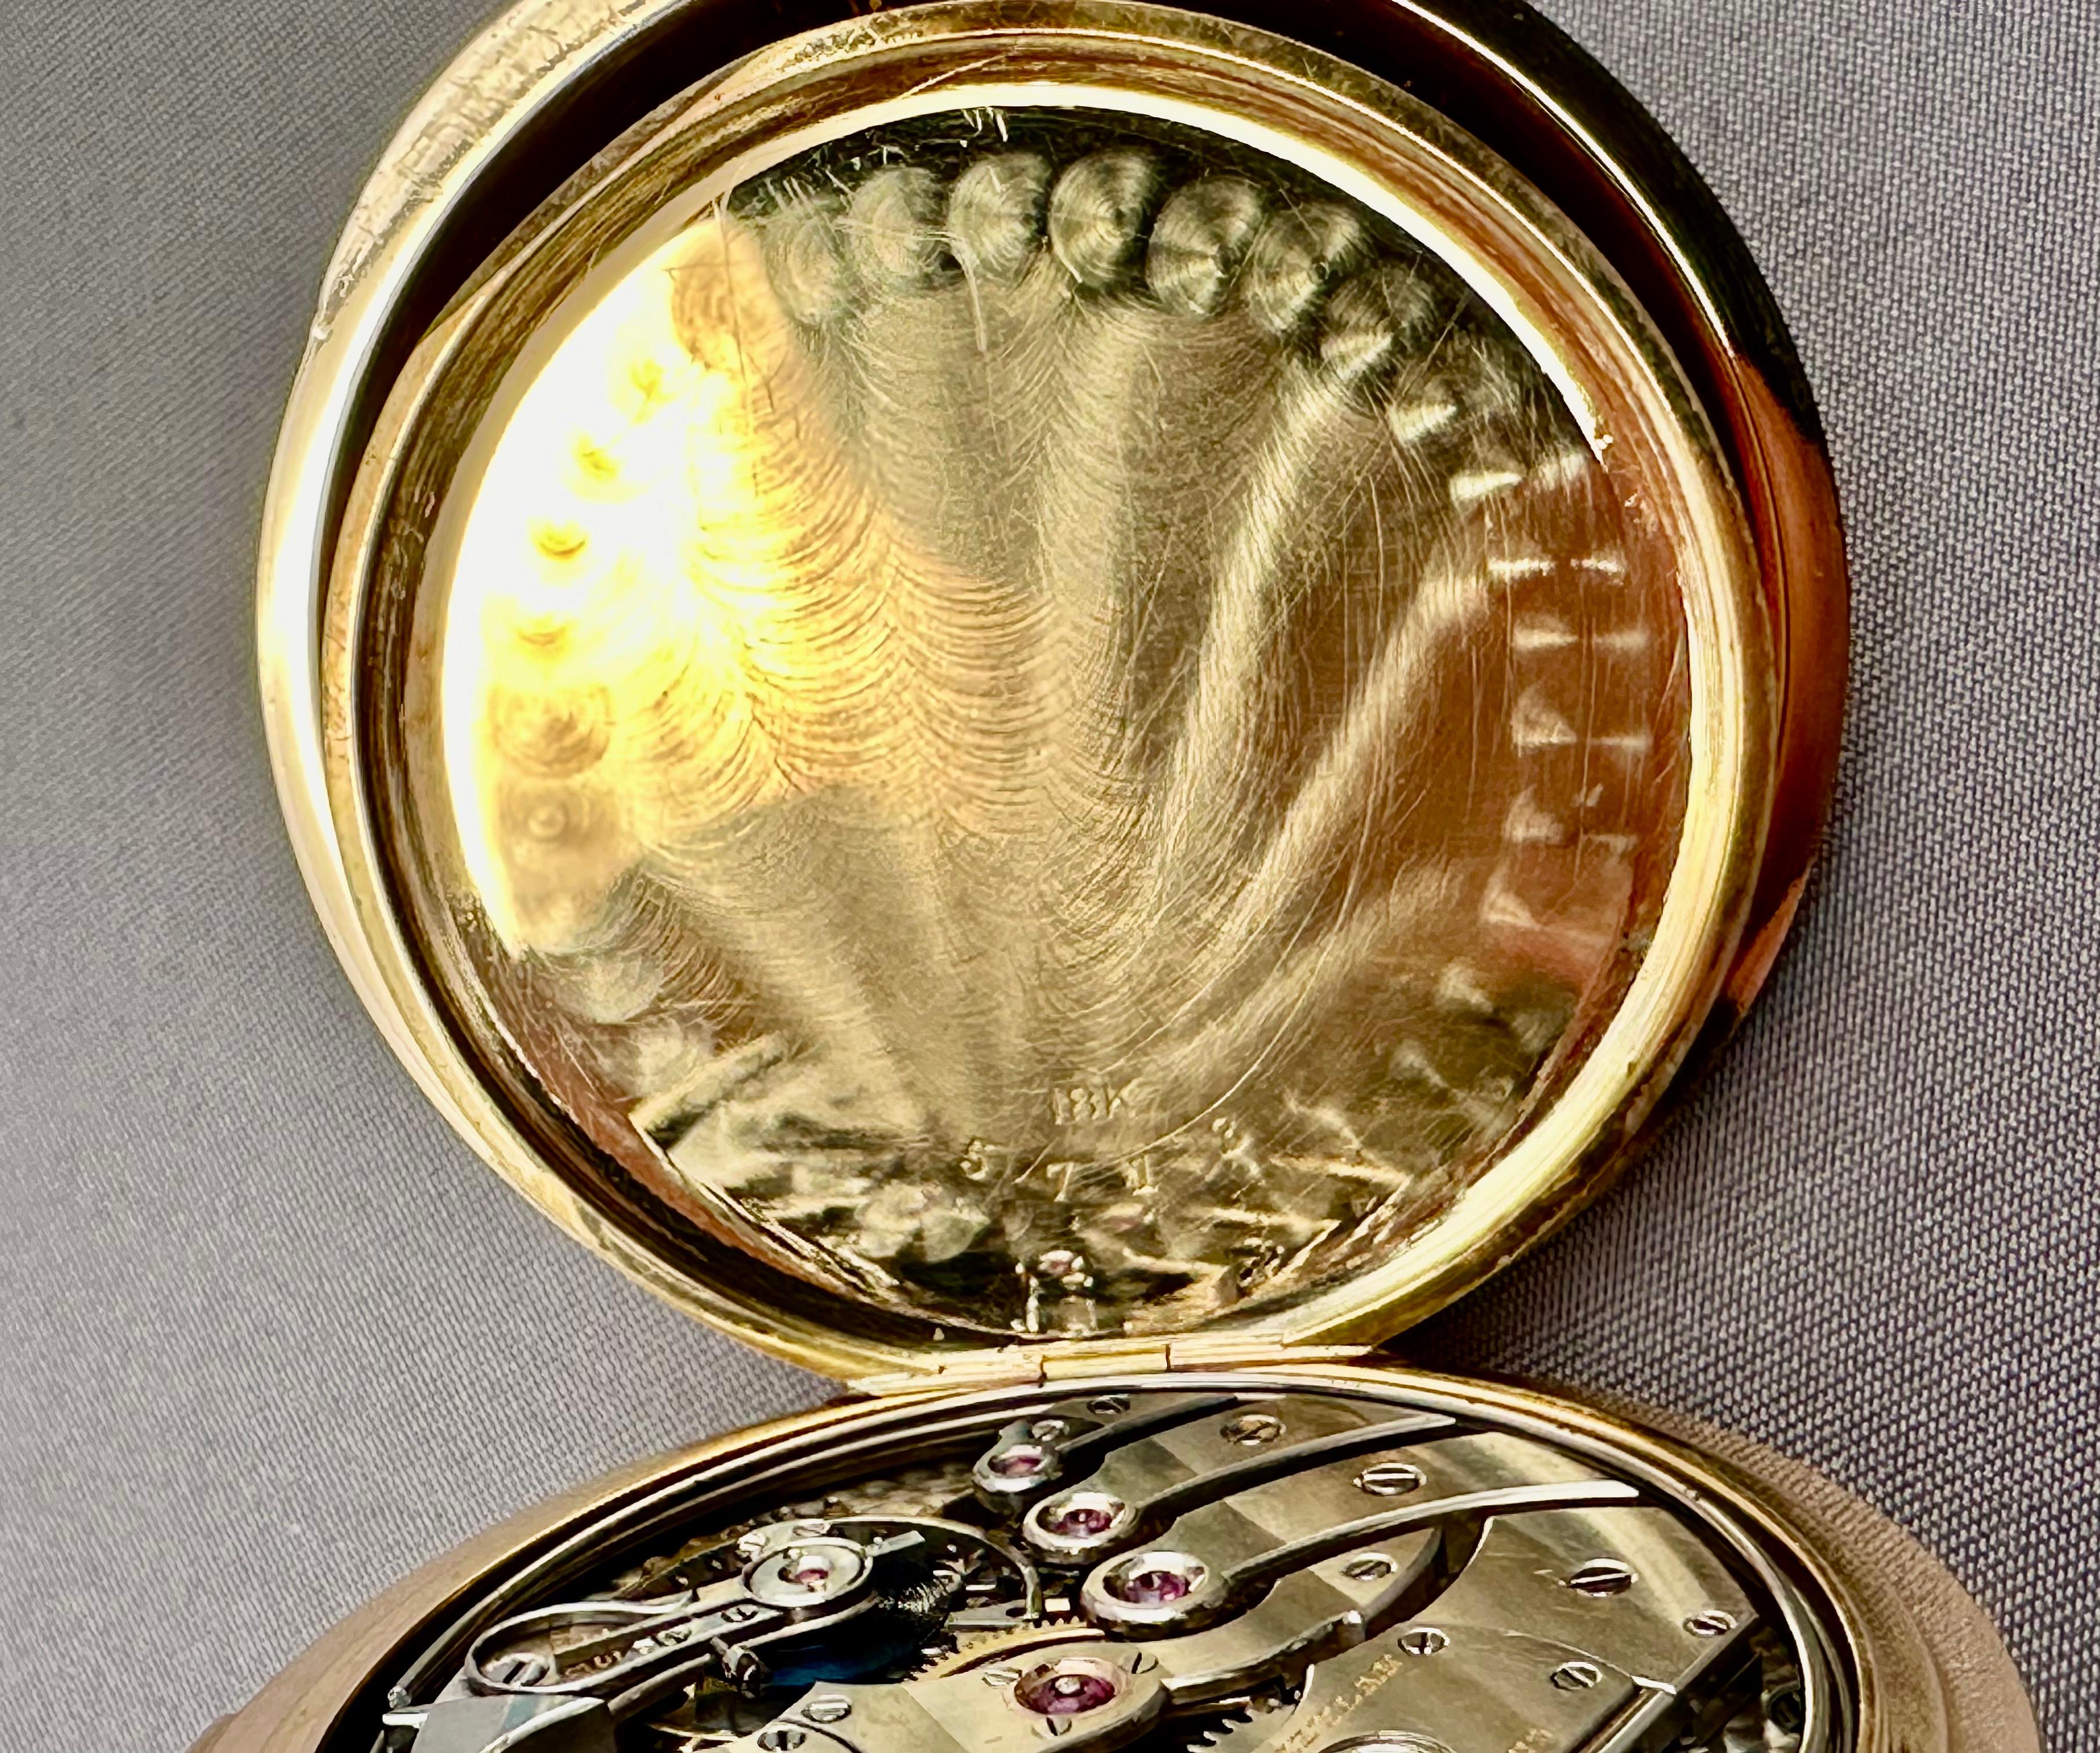 C.H. Meylan 18K Gold Keyless Lever Minute Repeater Pocket Watch Circa 1890's In Excellent Condition For Sale In Laguna Beach, CA